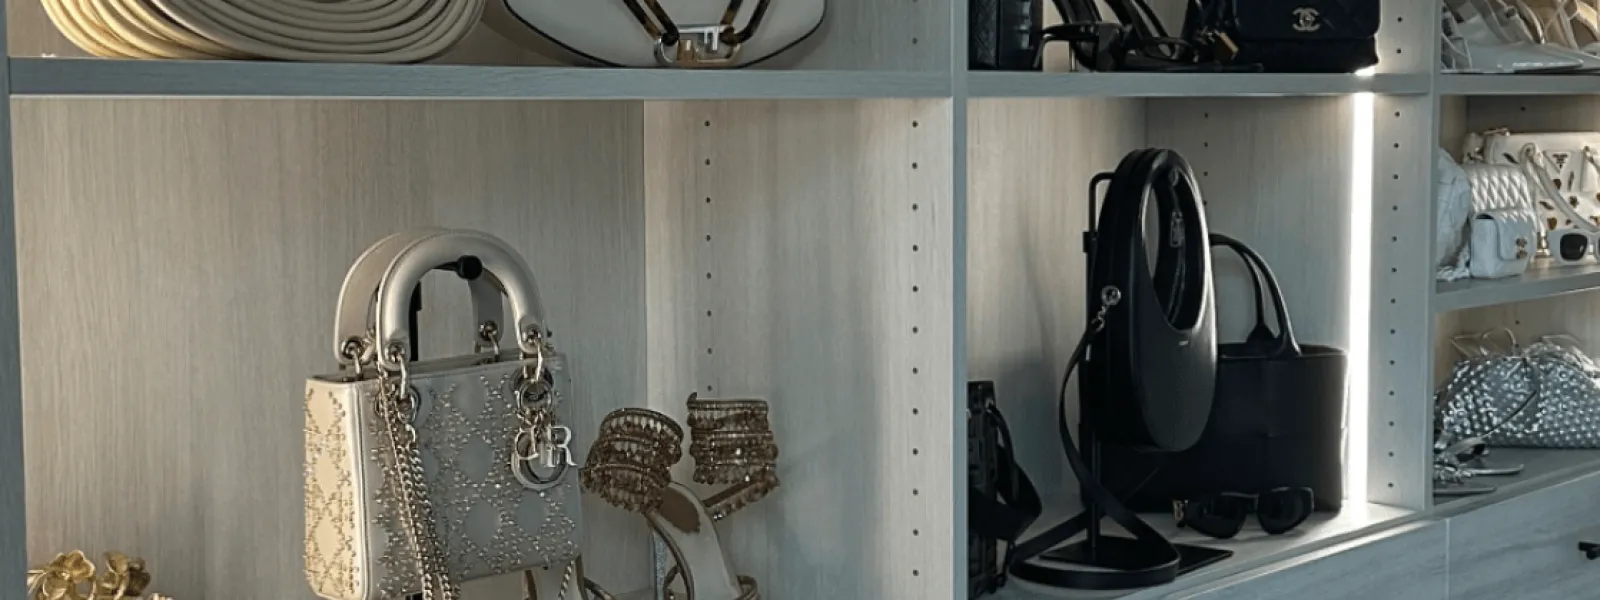 shelf with shoes on it - Lighting in a Custom Closet Design